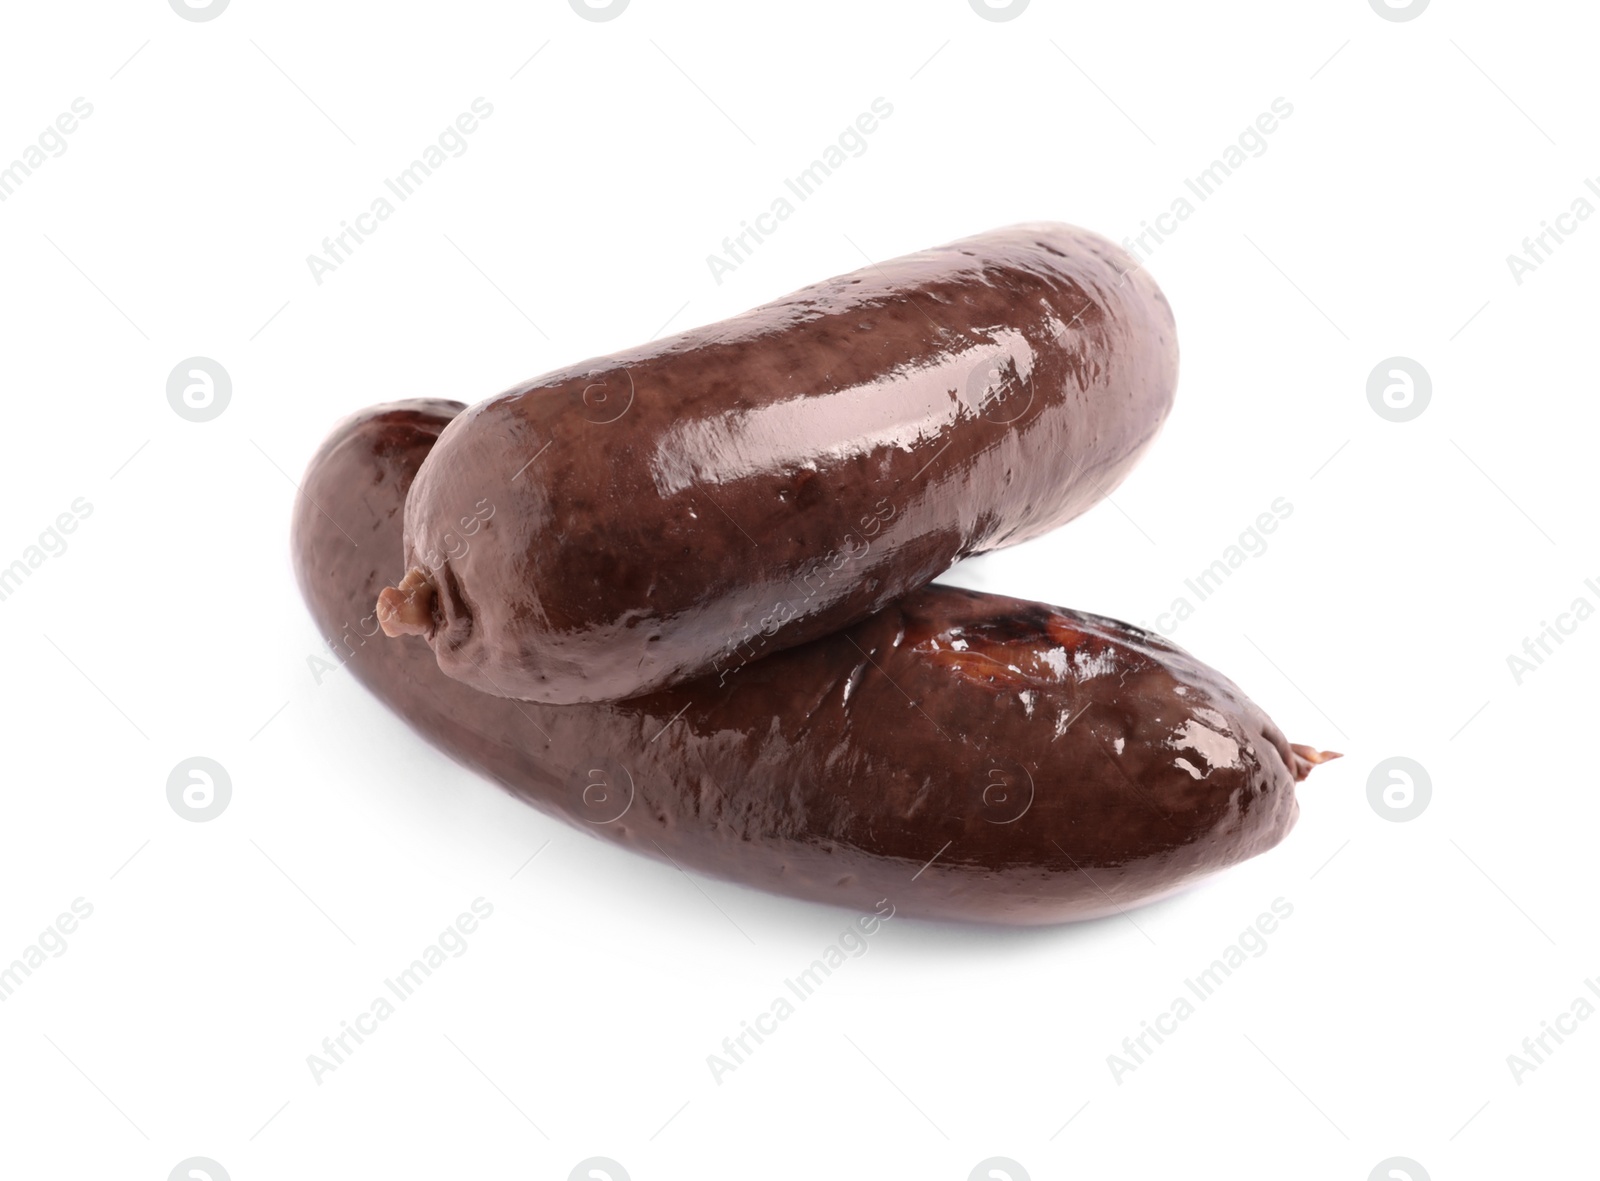 Photo of Whole tasty blood sausages on white background